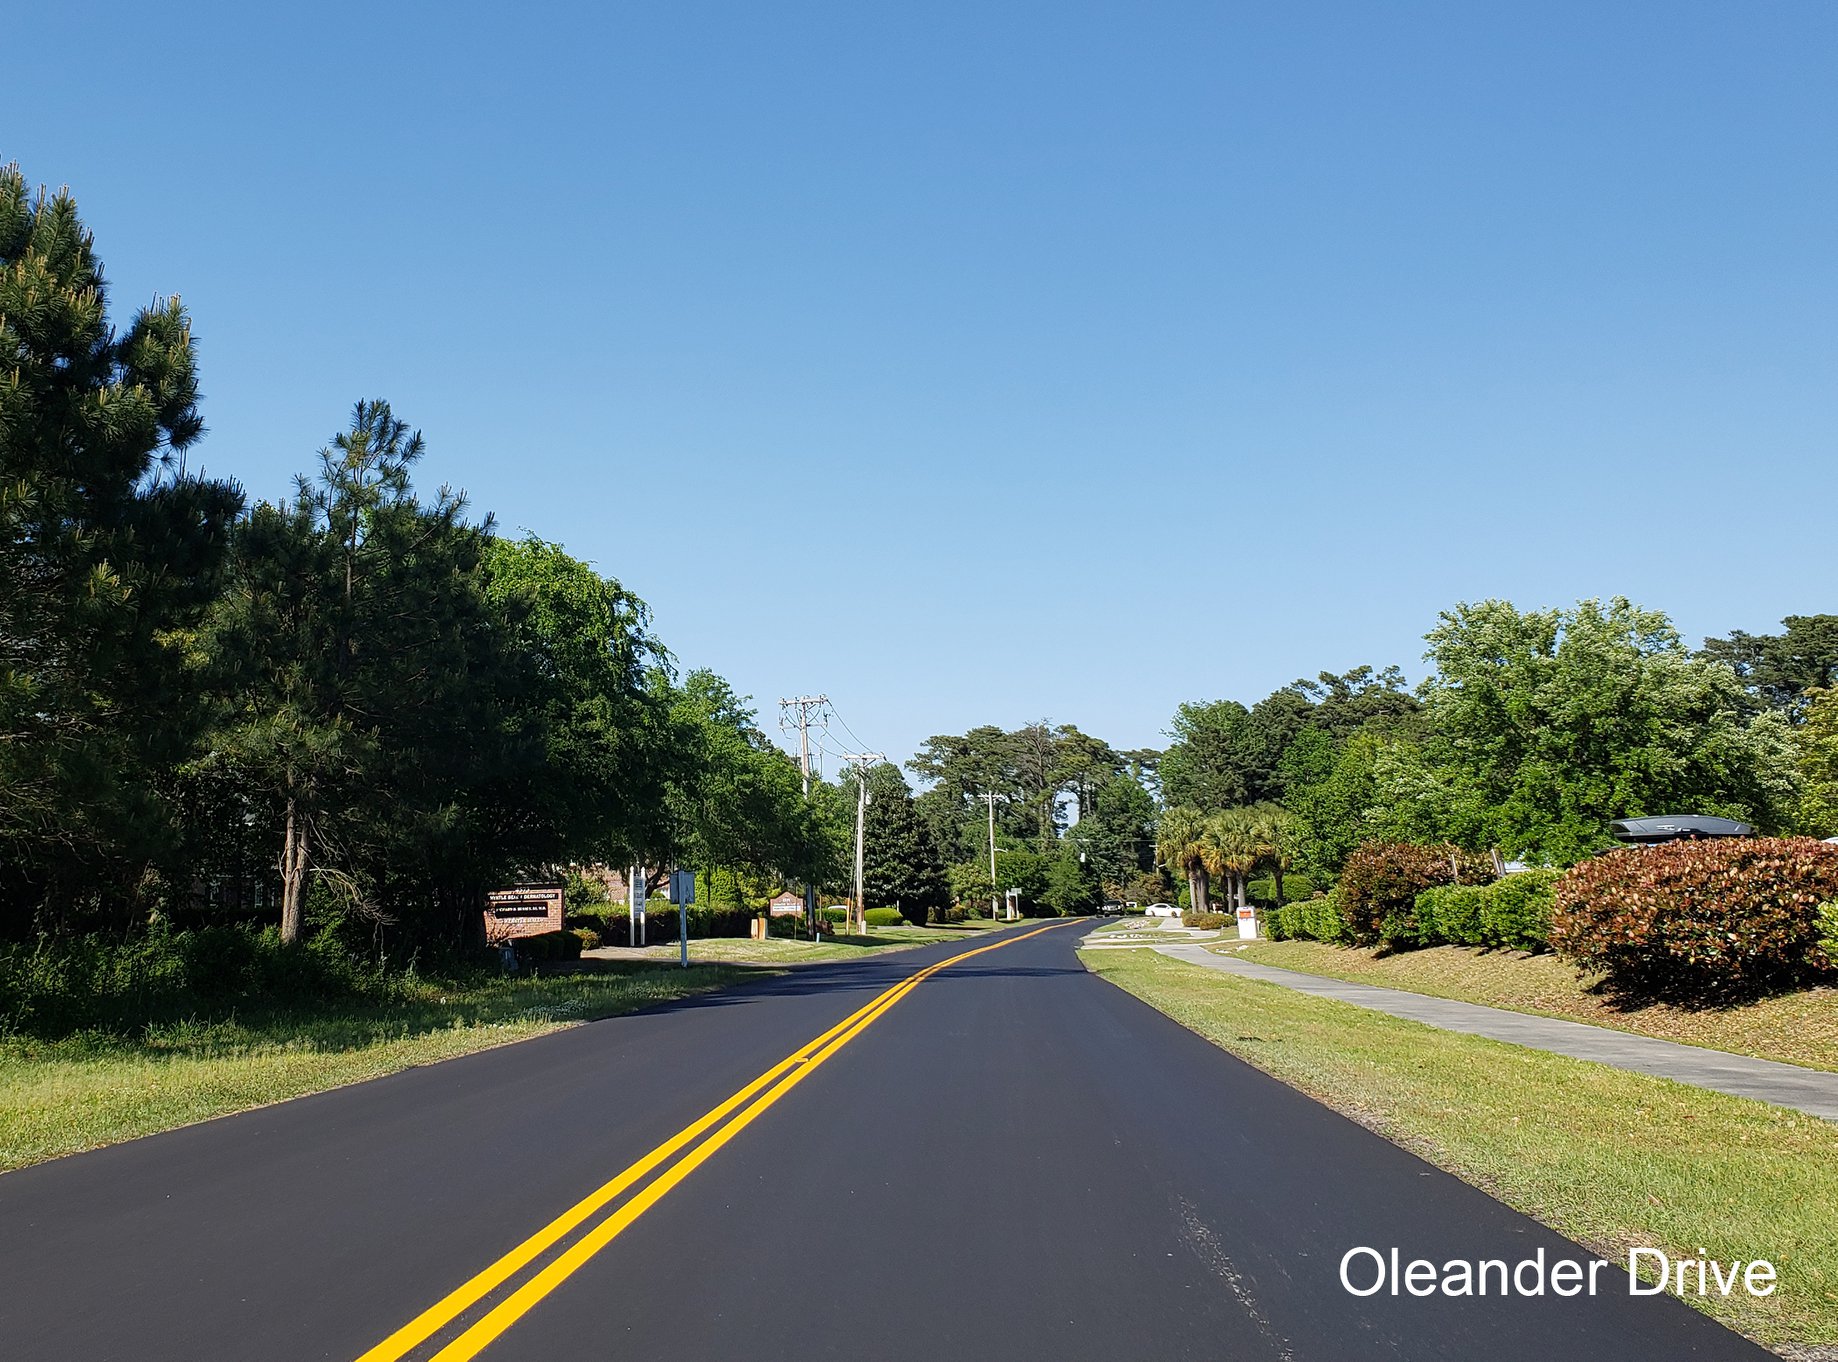 Milling and paving Oleander Drive